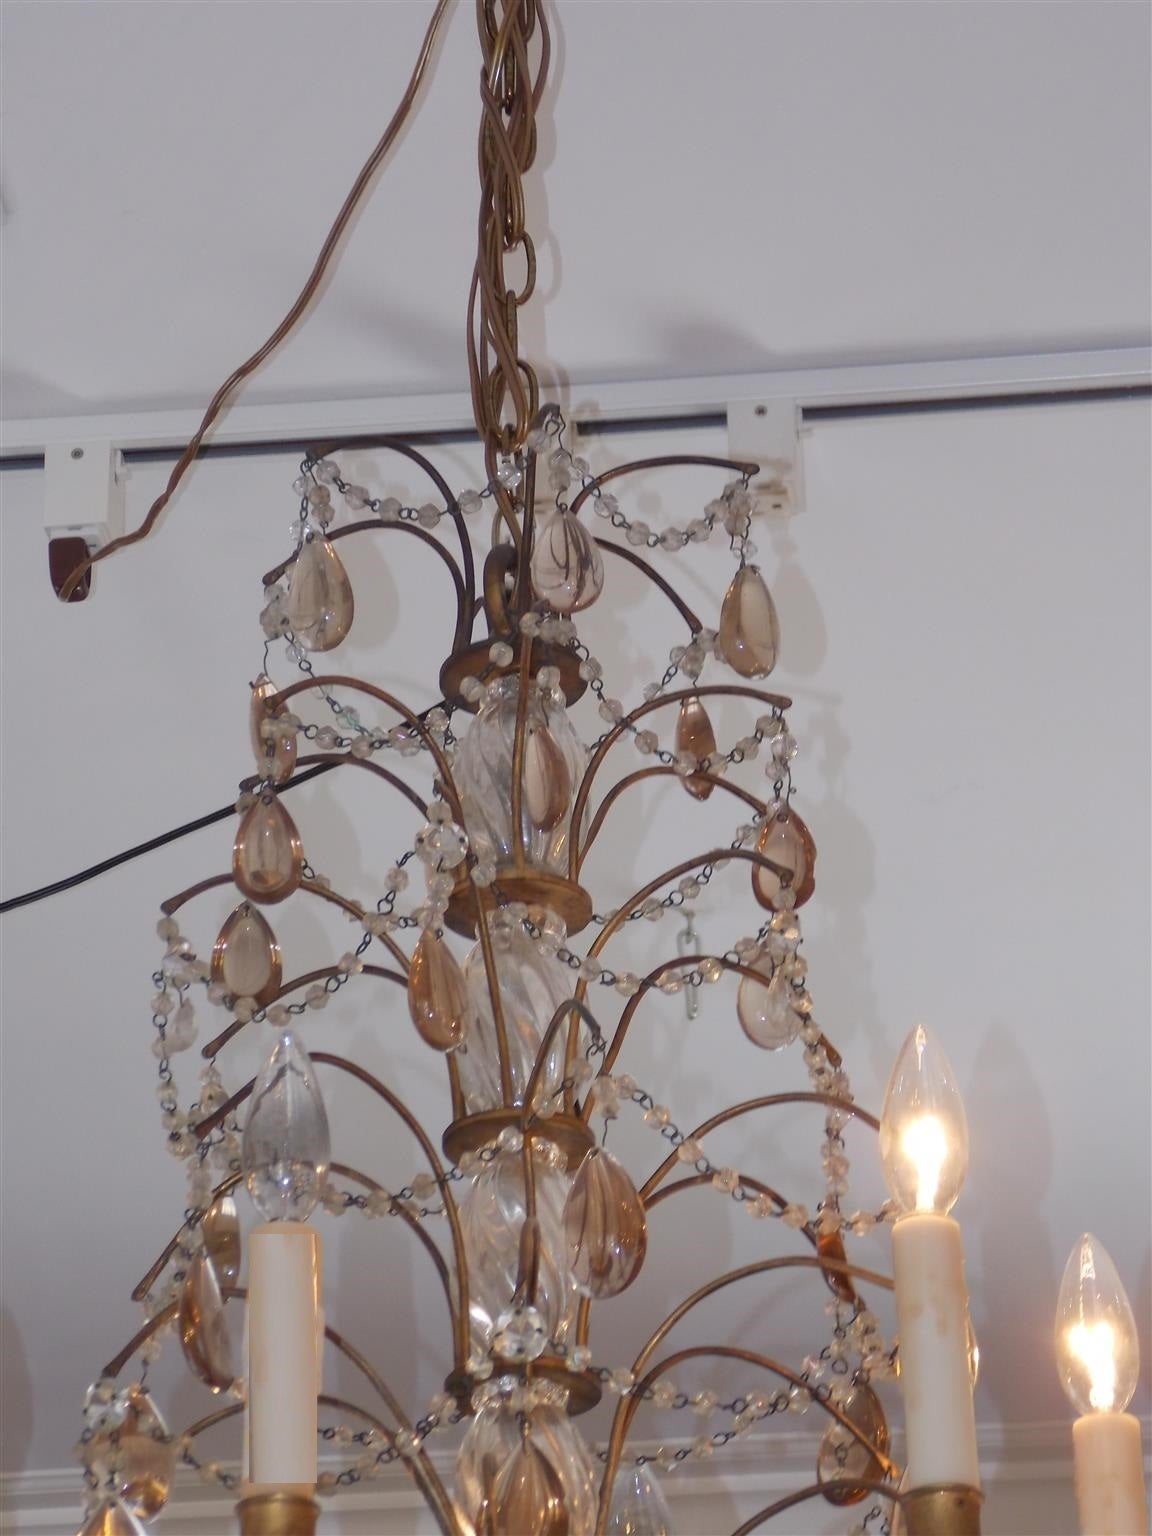 Mid-19th Century French Gilt Bronze and Crystal Tiered Chandelier, Circa 1830 For Sale